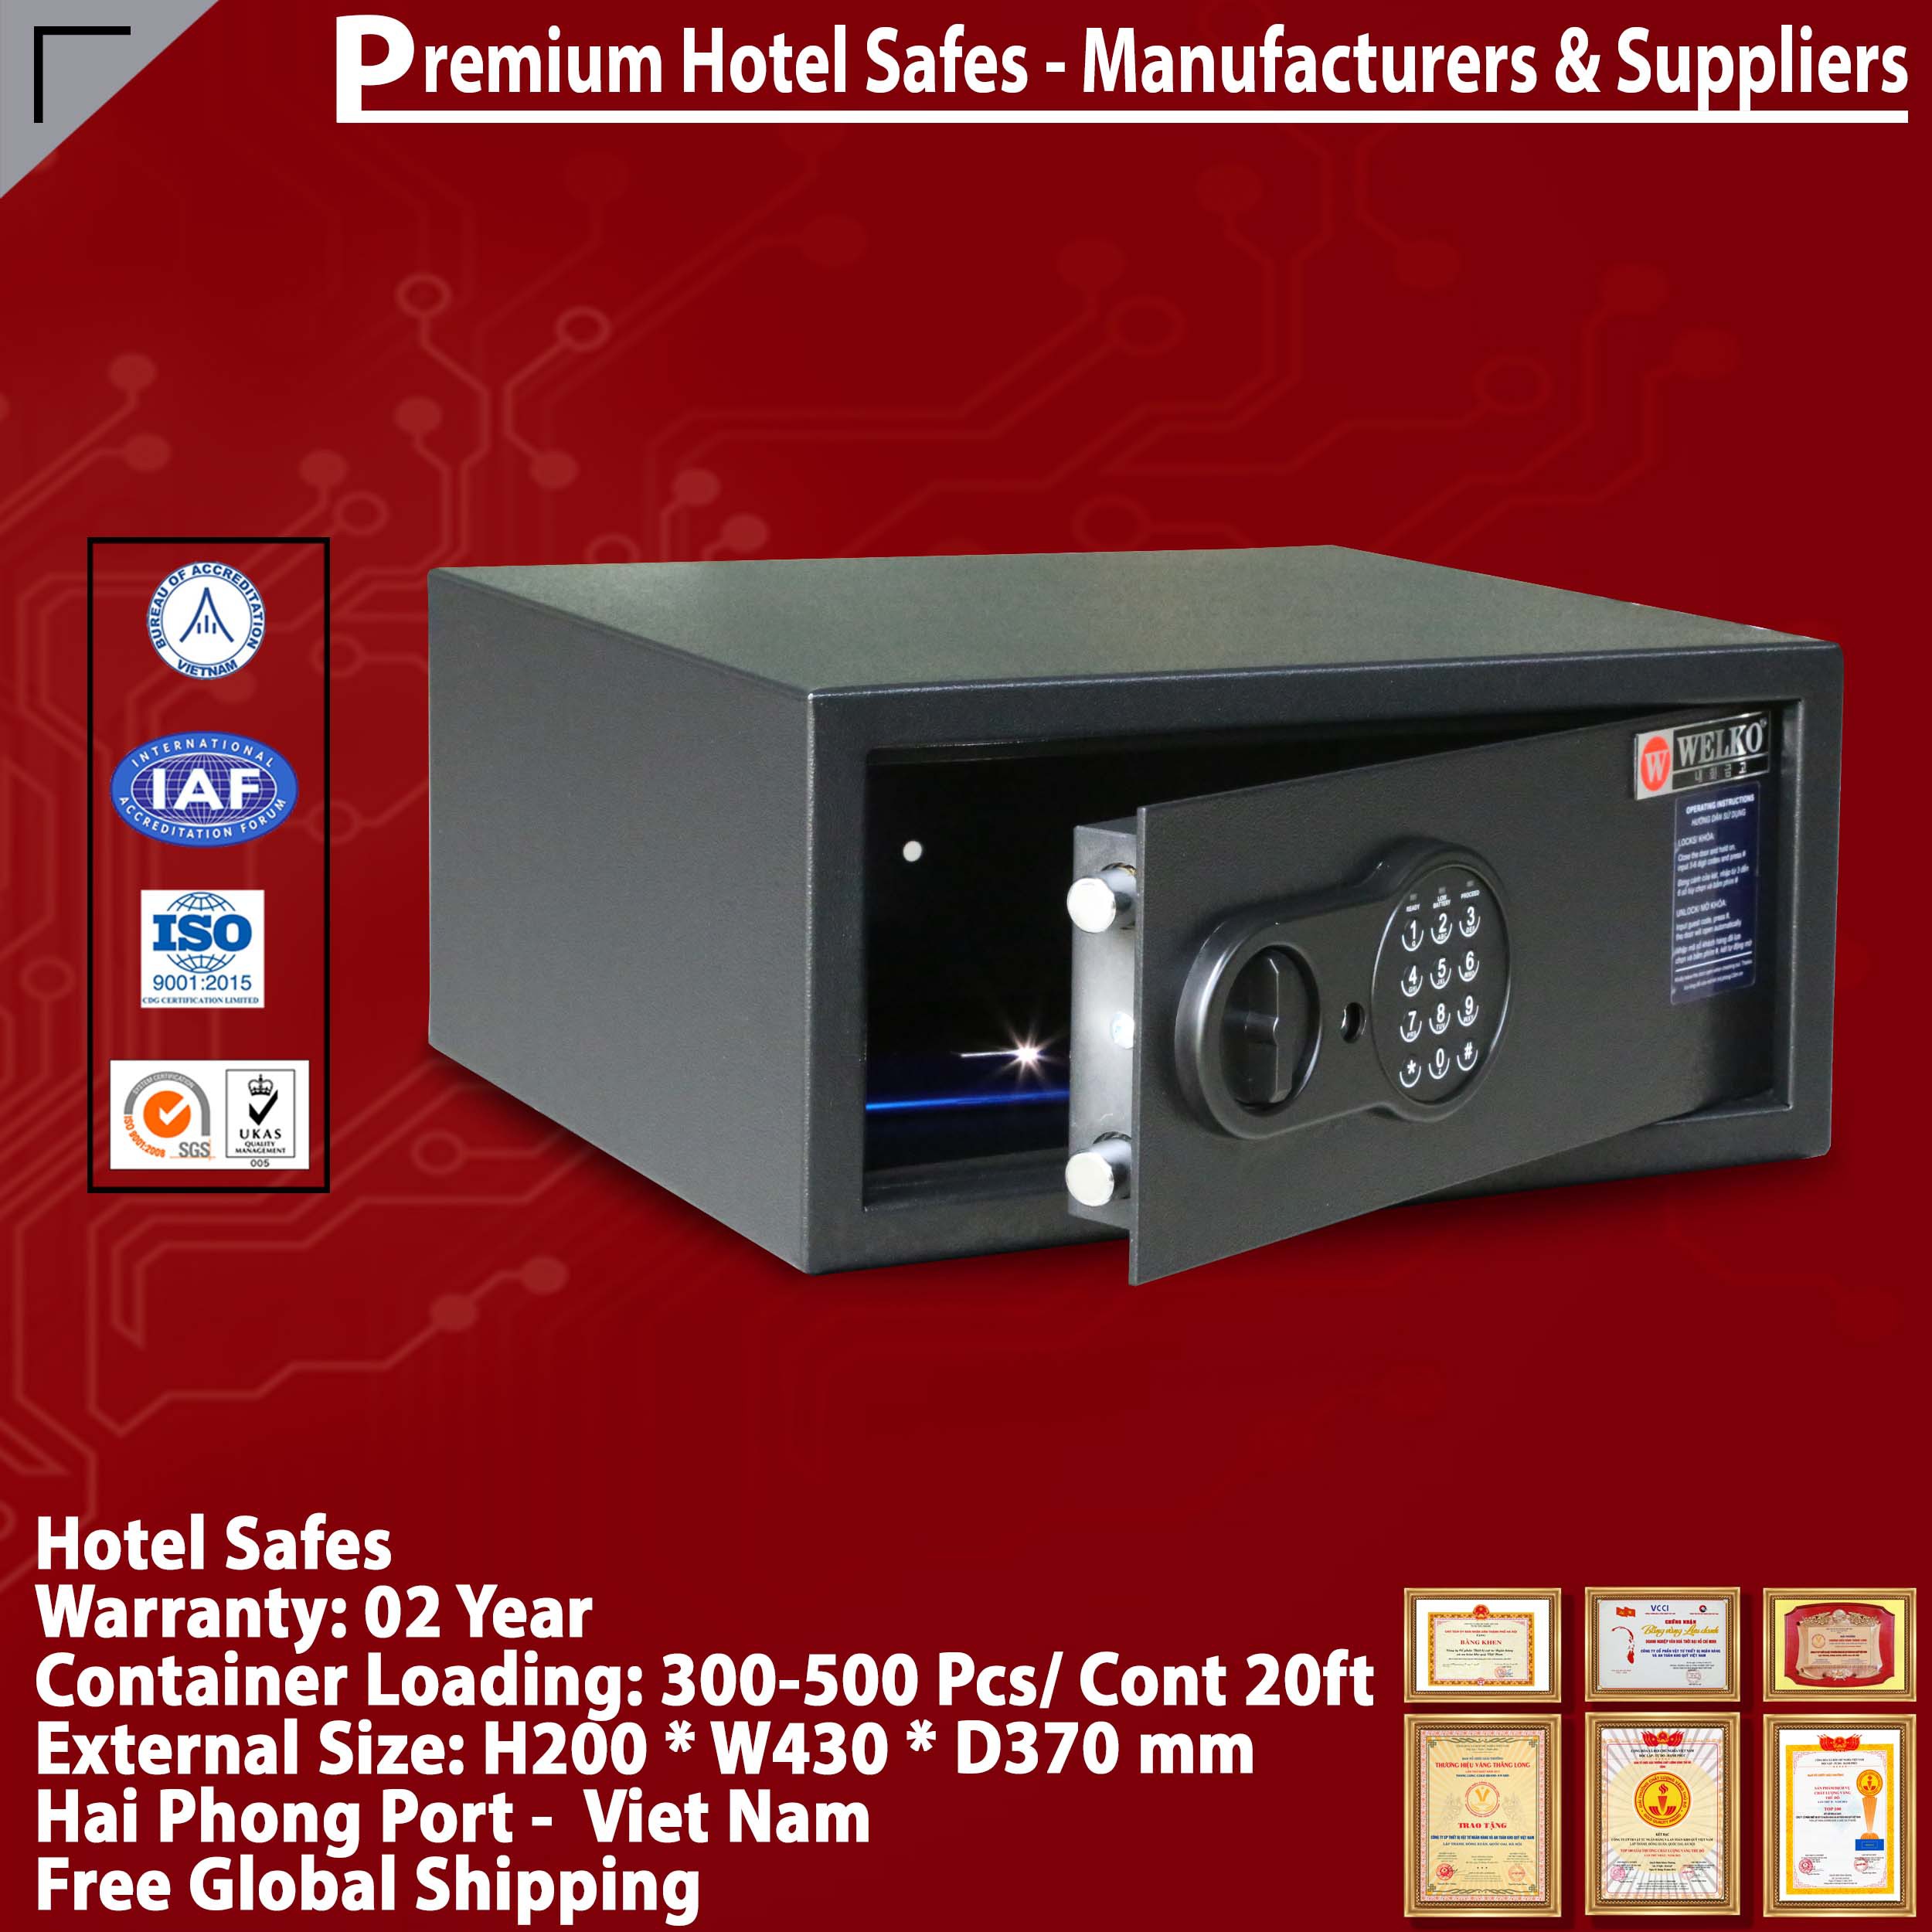 Hotel Room Security High Quality Price Ratio‎